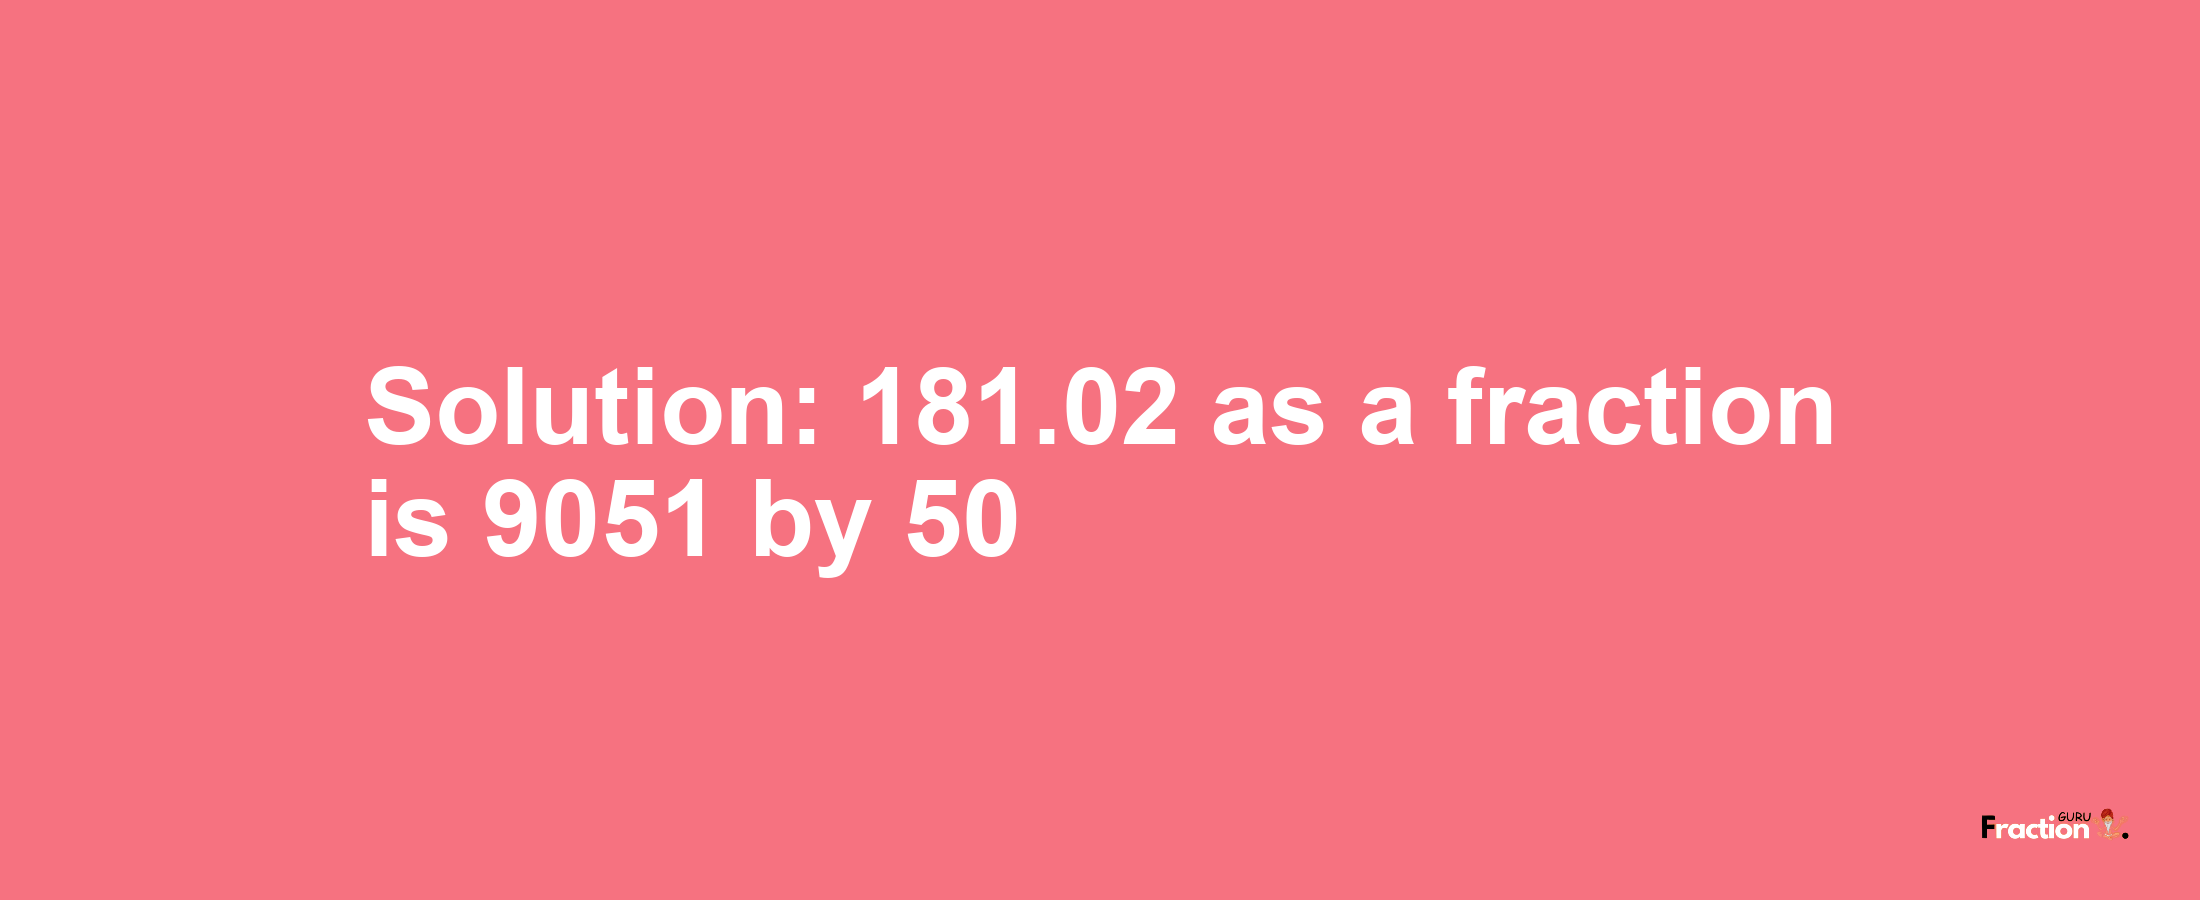 Solution:181.02 as a fraction is 9051/50